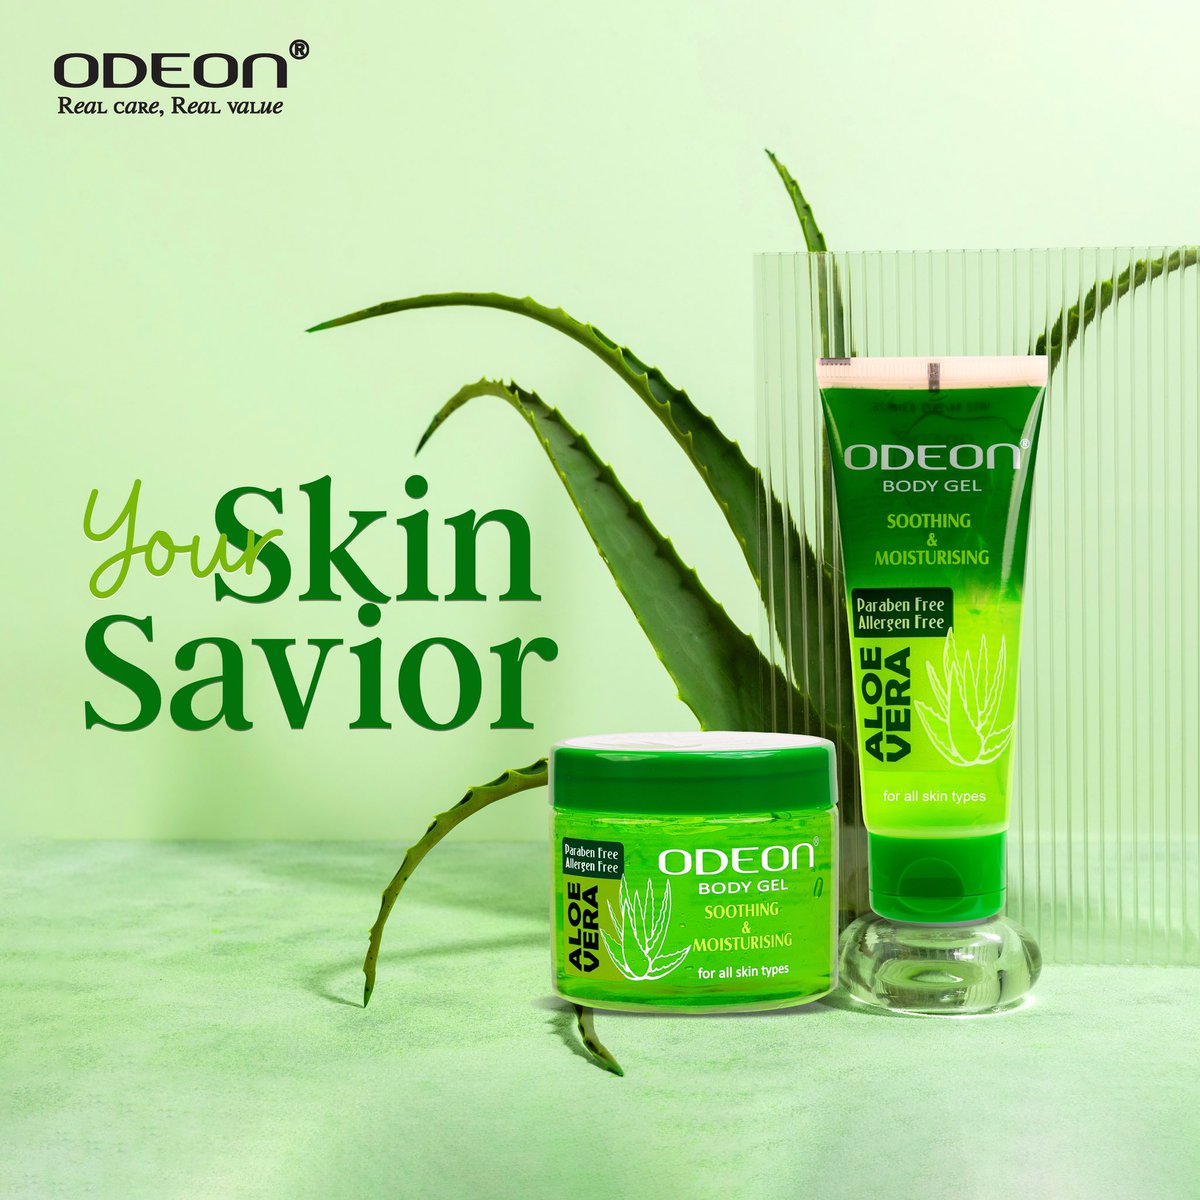 NO more dry skin, uneven skin tone, pimples, pale skin, dark spots and oily skin.
Proudly serving looks, brought to you by Aloe vera gel👏🏾, or all skin types. Get yourself a soothing and moisturized skin at an affordable price.

#selfcare #aloevera #gel #glowing #chooseodeon